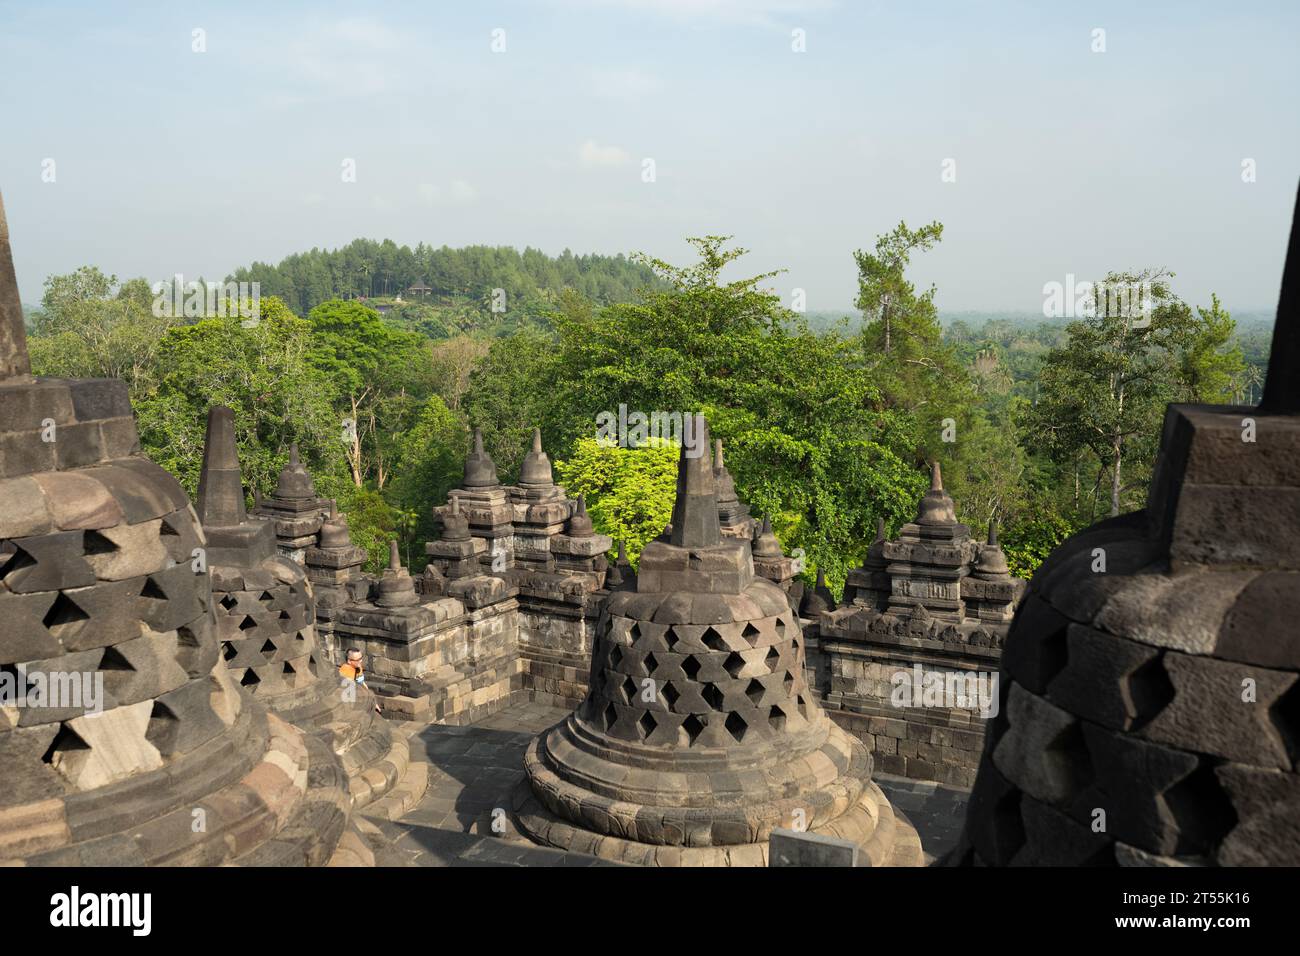 (Selective focus) Stunning view of the Borobudur bell shaped stupas during a beautiful sunrise. Borobudur is a Mahayana Buddhist temple in Indonesia. Stock Photo